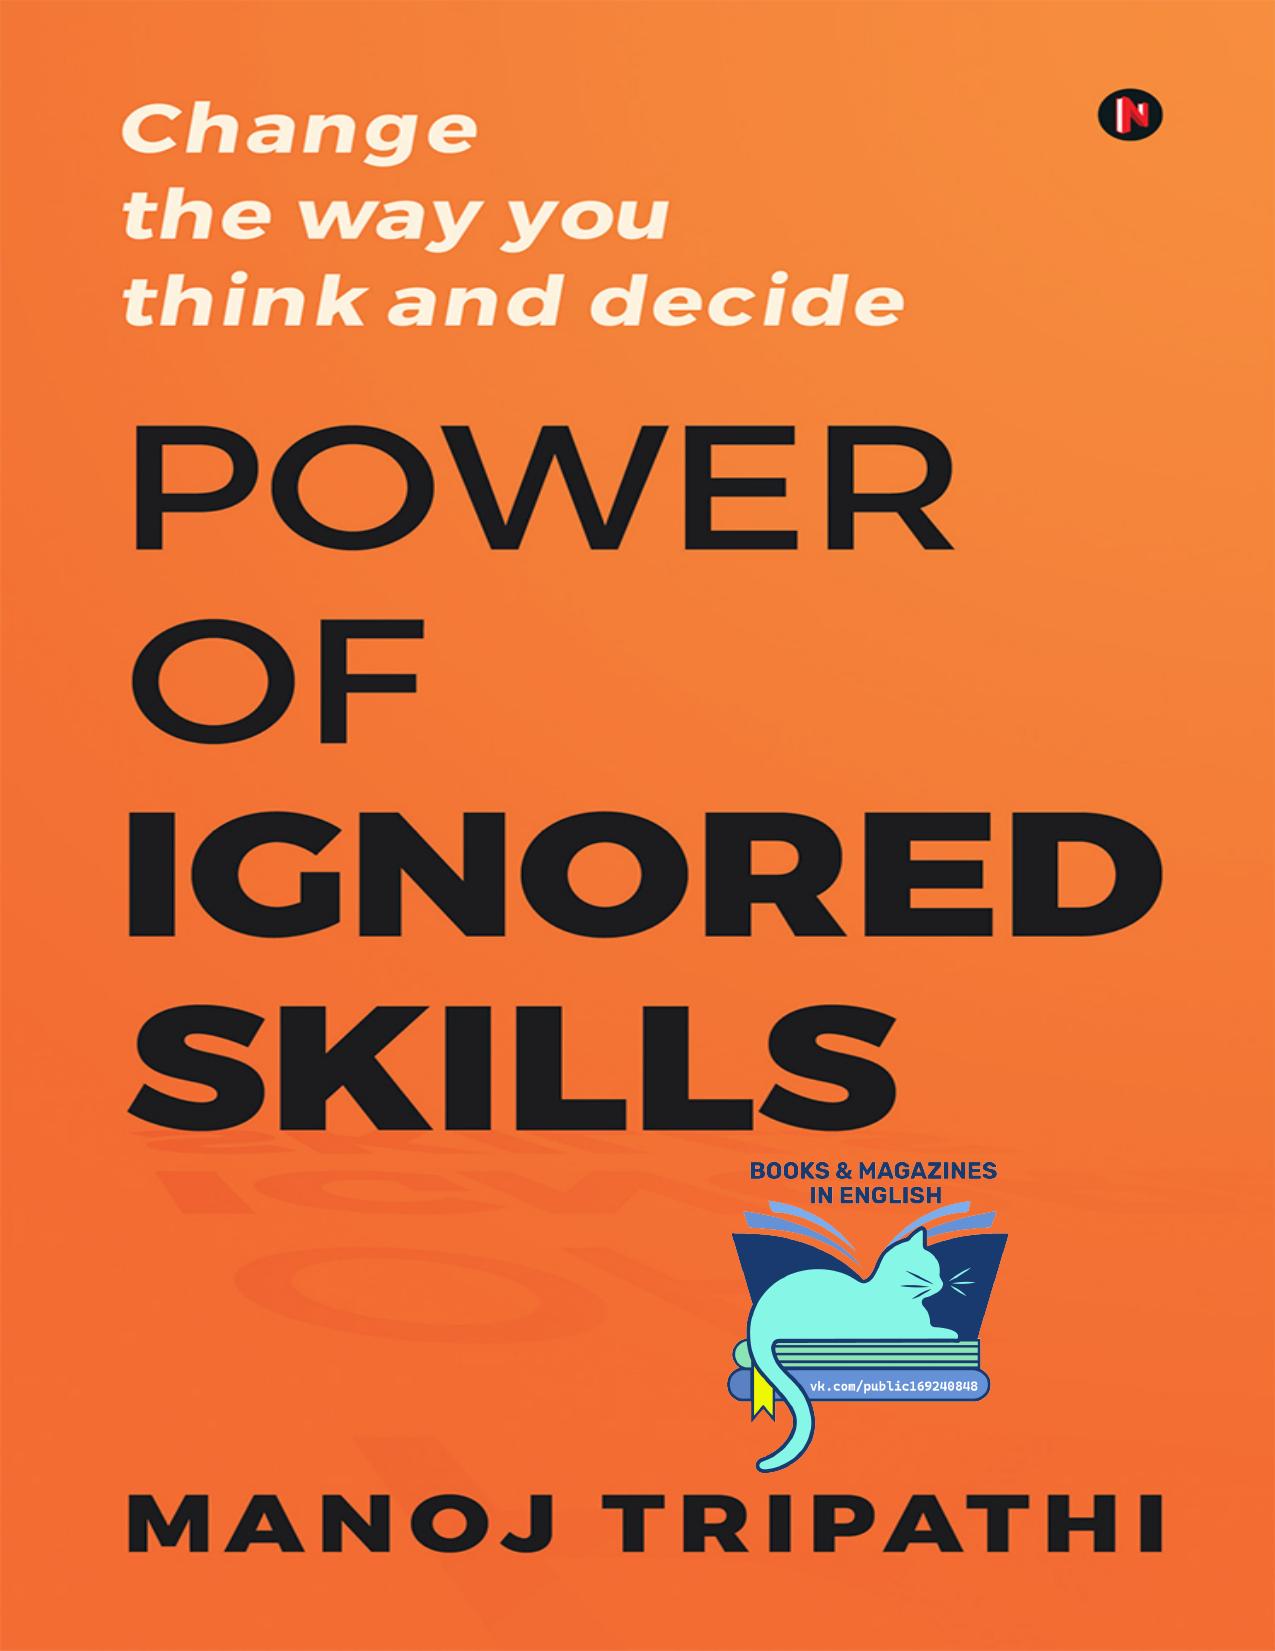 Power of Ignored Skills: Change the way you think and decide by Manoj Tripathi